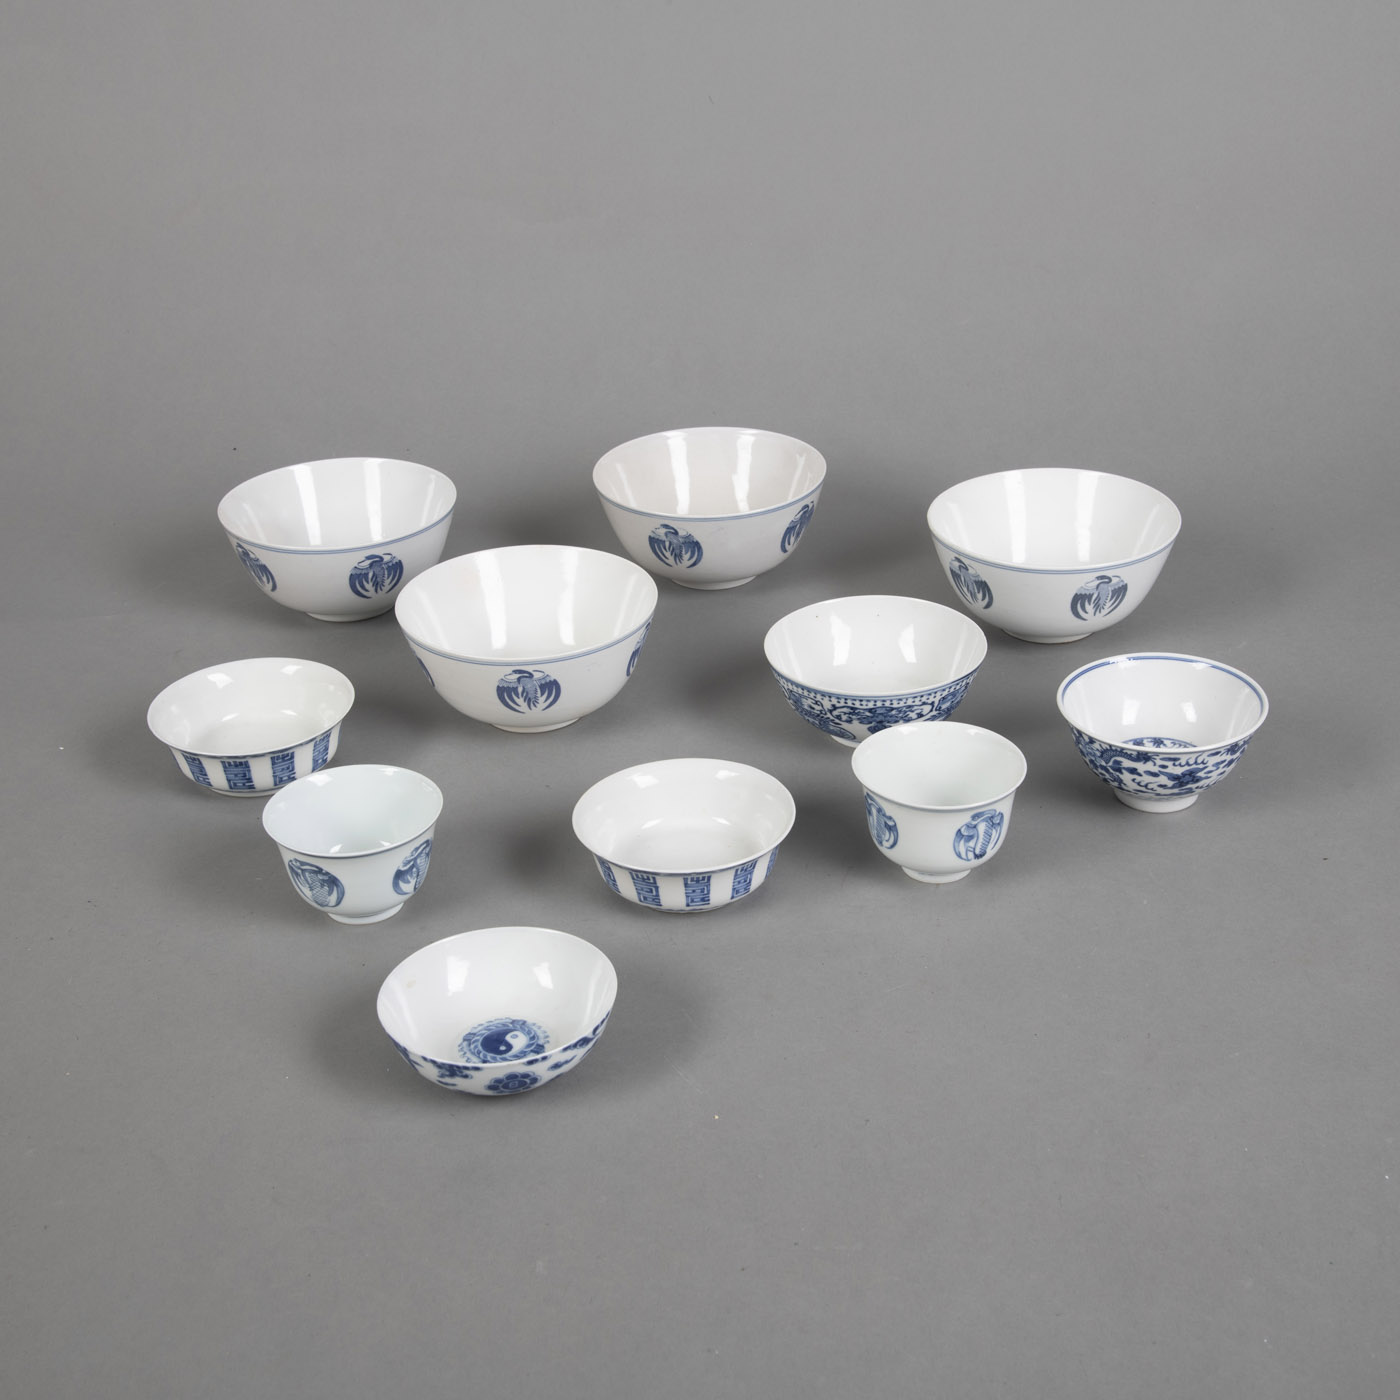 <b>A GROUP OF ELEVEN PORCELAIN BOWLS DECORATED WITH UNDERGLAZE BLUE CRANE MEDALLIONS, DRAGONS AND SHOU CHARACTERS</b>